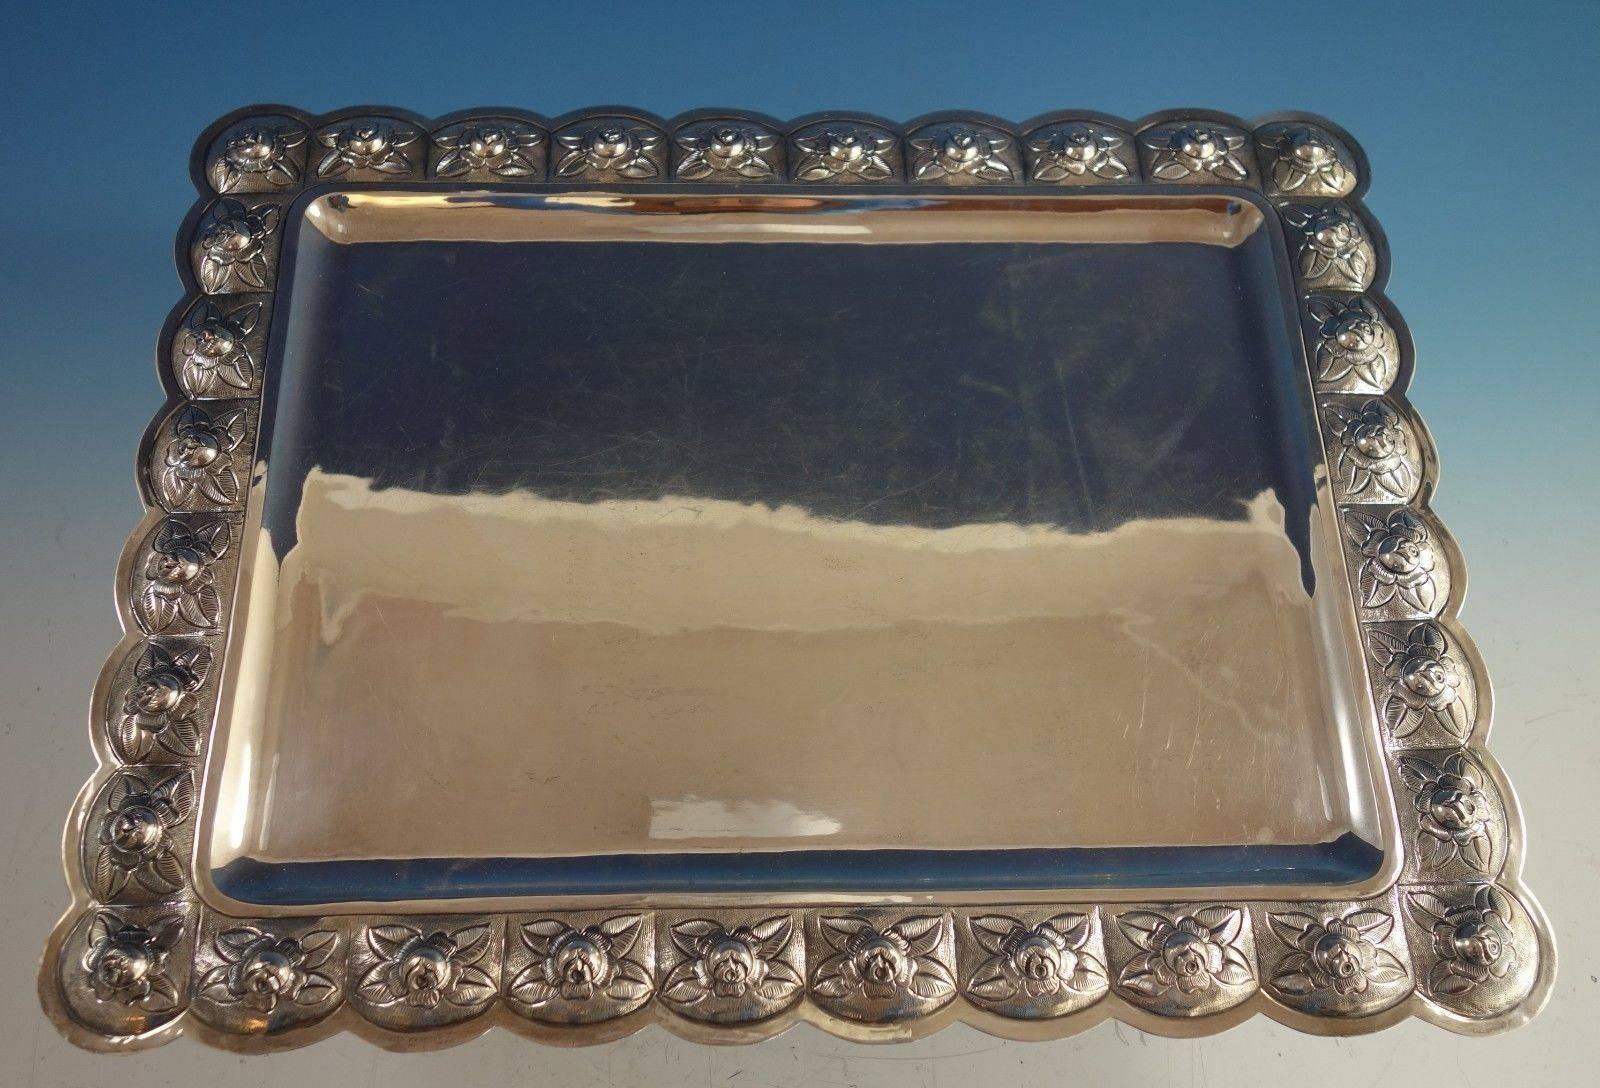 Aztec Rose by Sanborns rectangular sterling silver serving tray. The tray measures 1/4